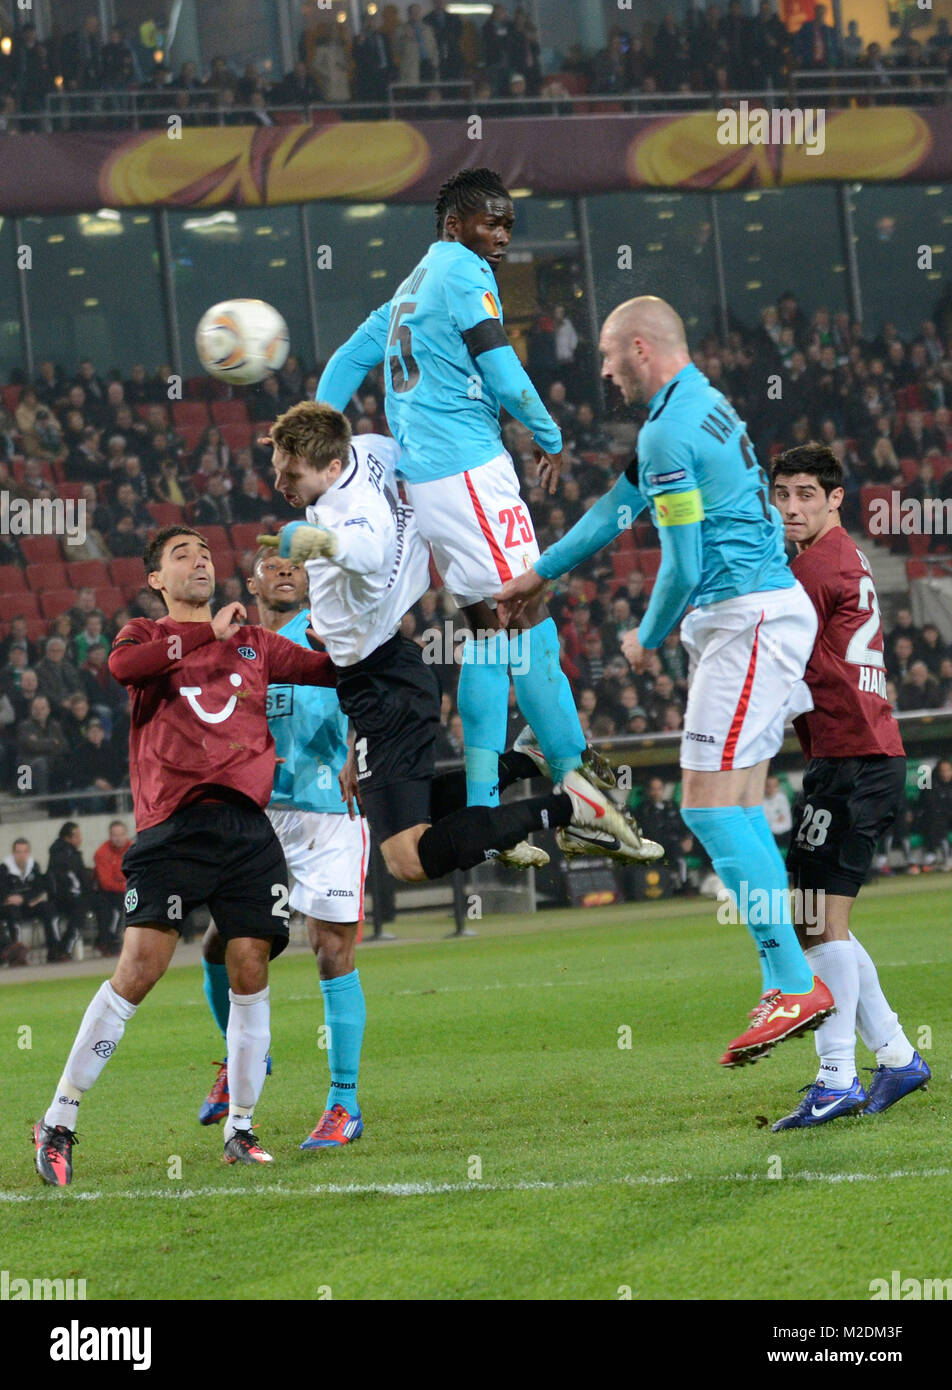 Europaleague 2012: Hannover 96 schlaegt Standard Luettich 4:0 in der AWD Arena in Hannover am 15.03.2012 Stock Photo